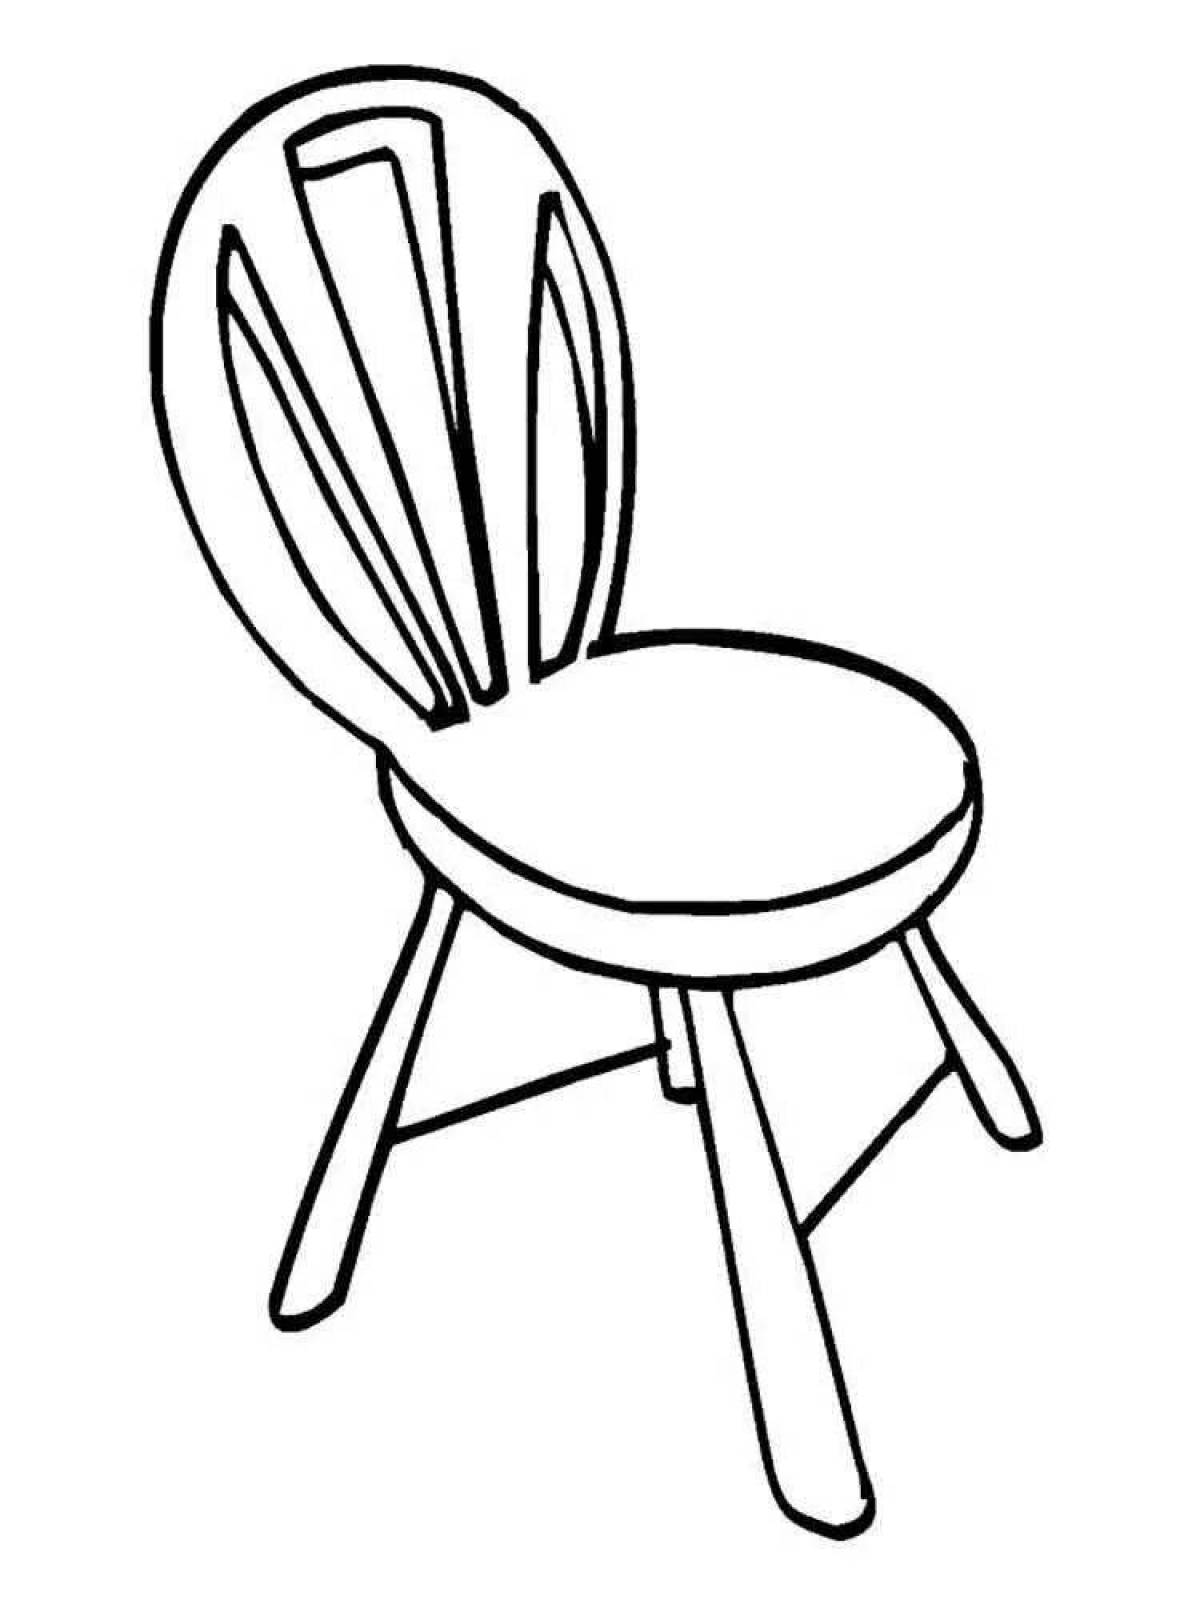 Coloring book of a cheerful highchair